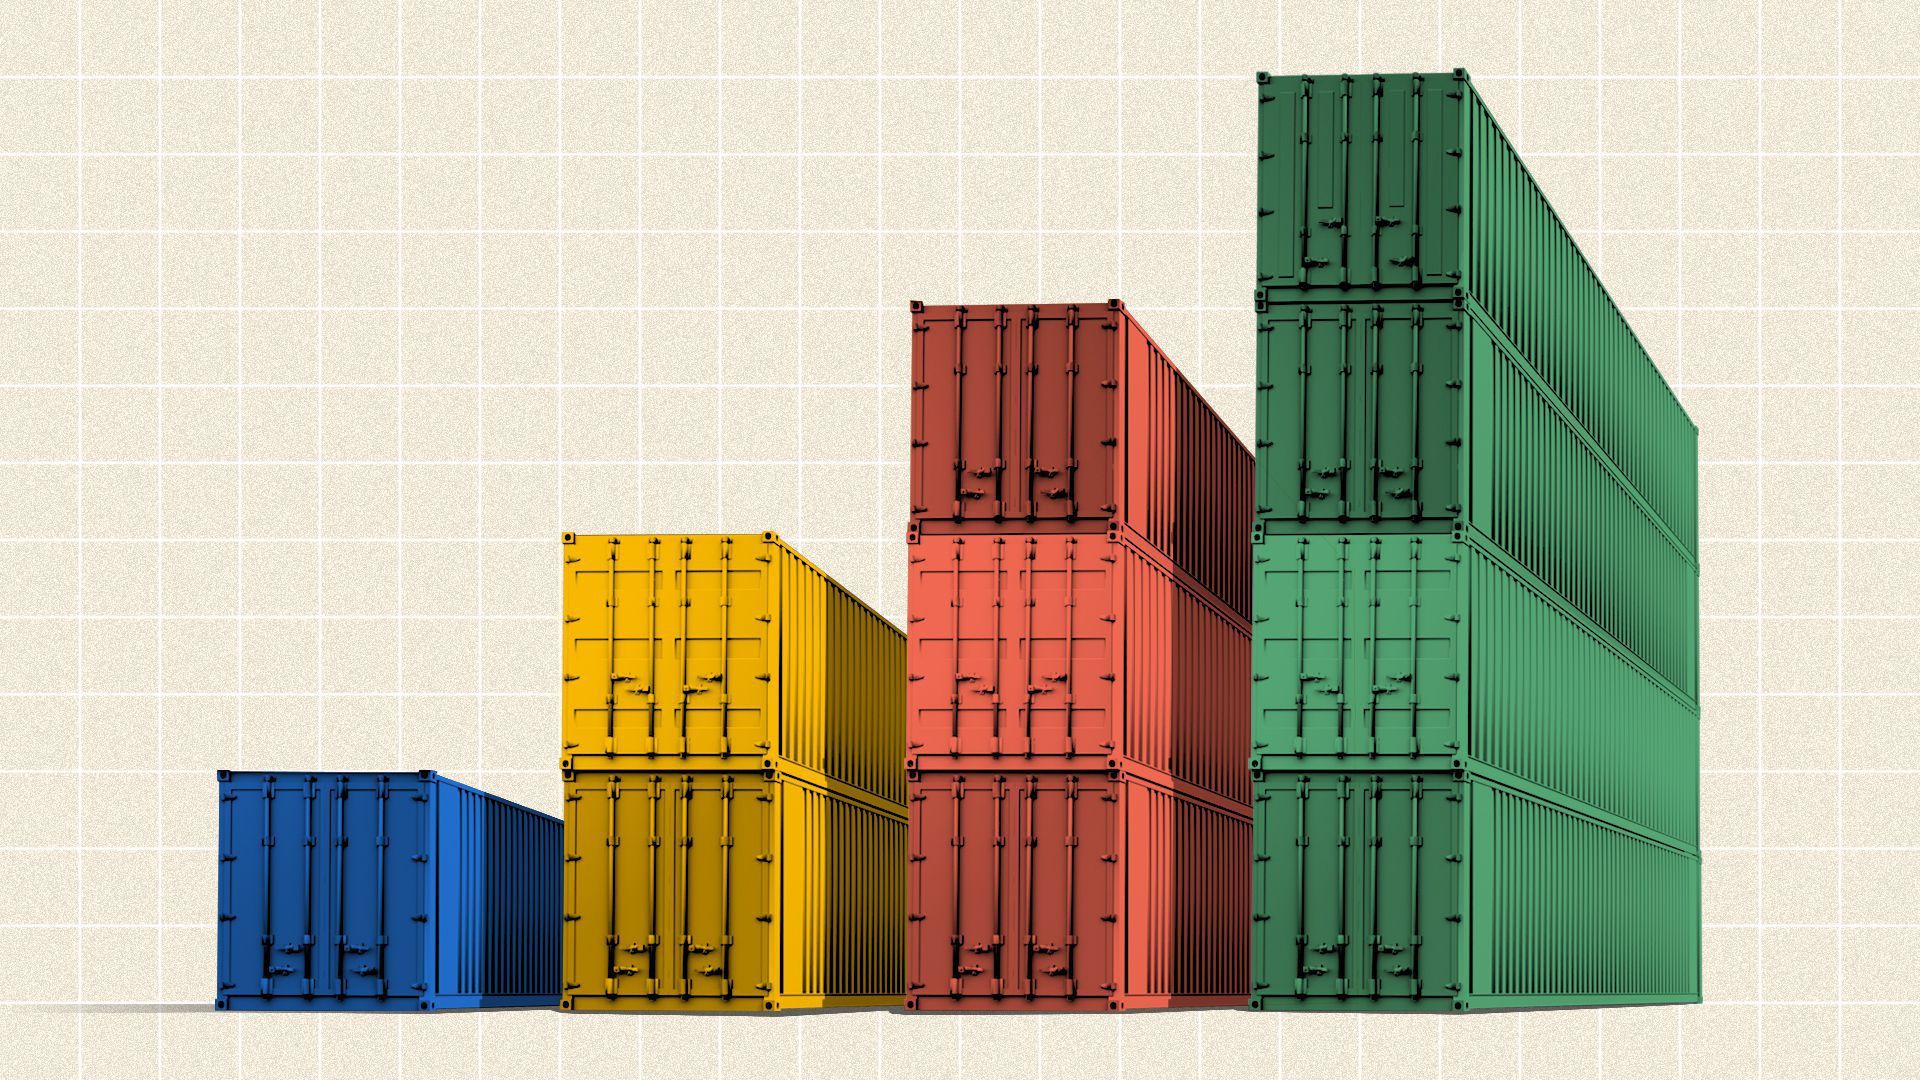 Illustration of shipping containers.